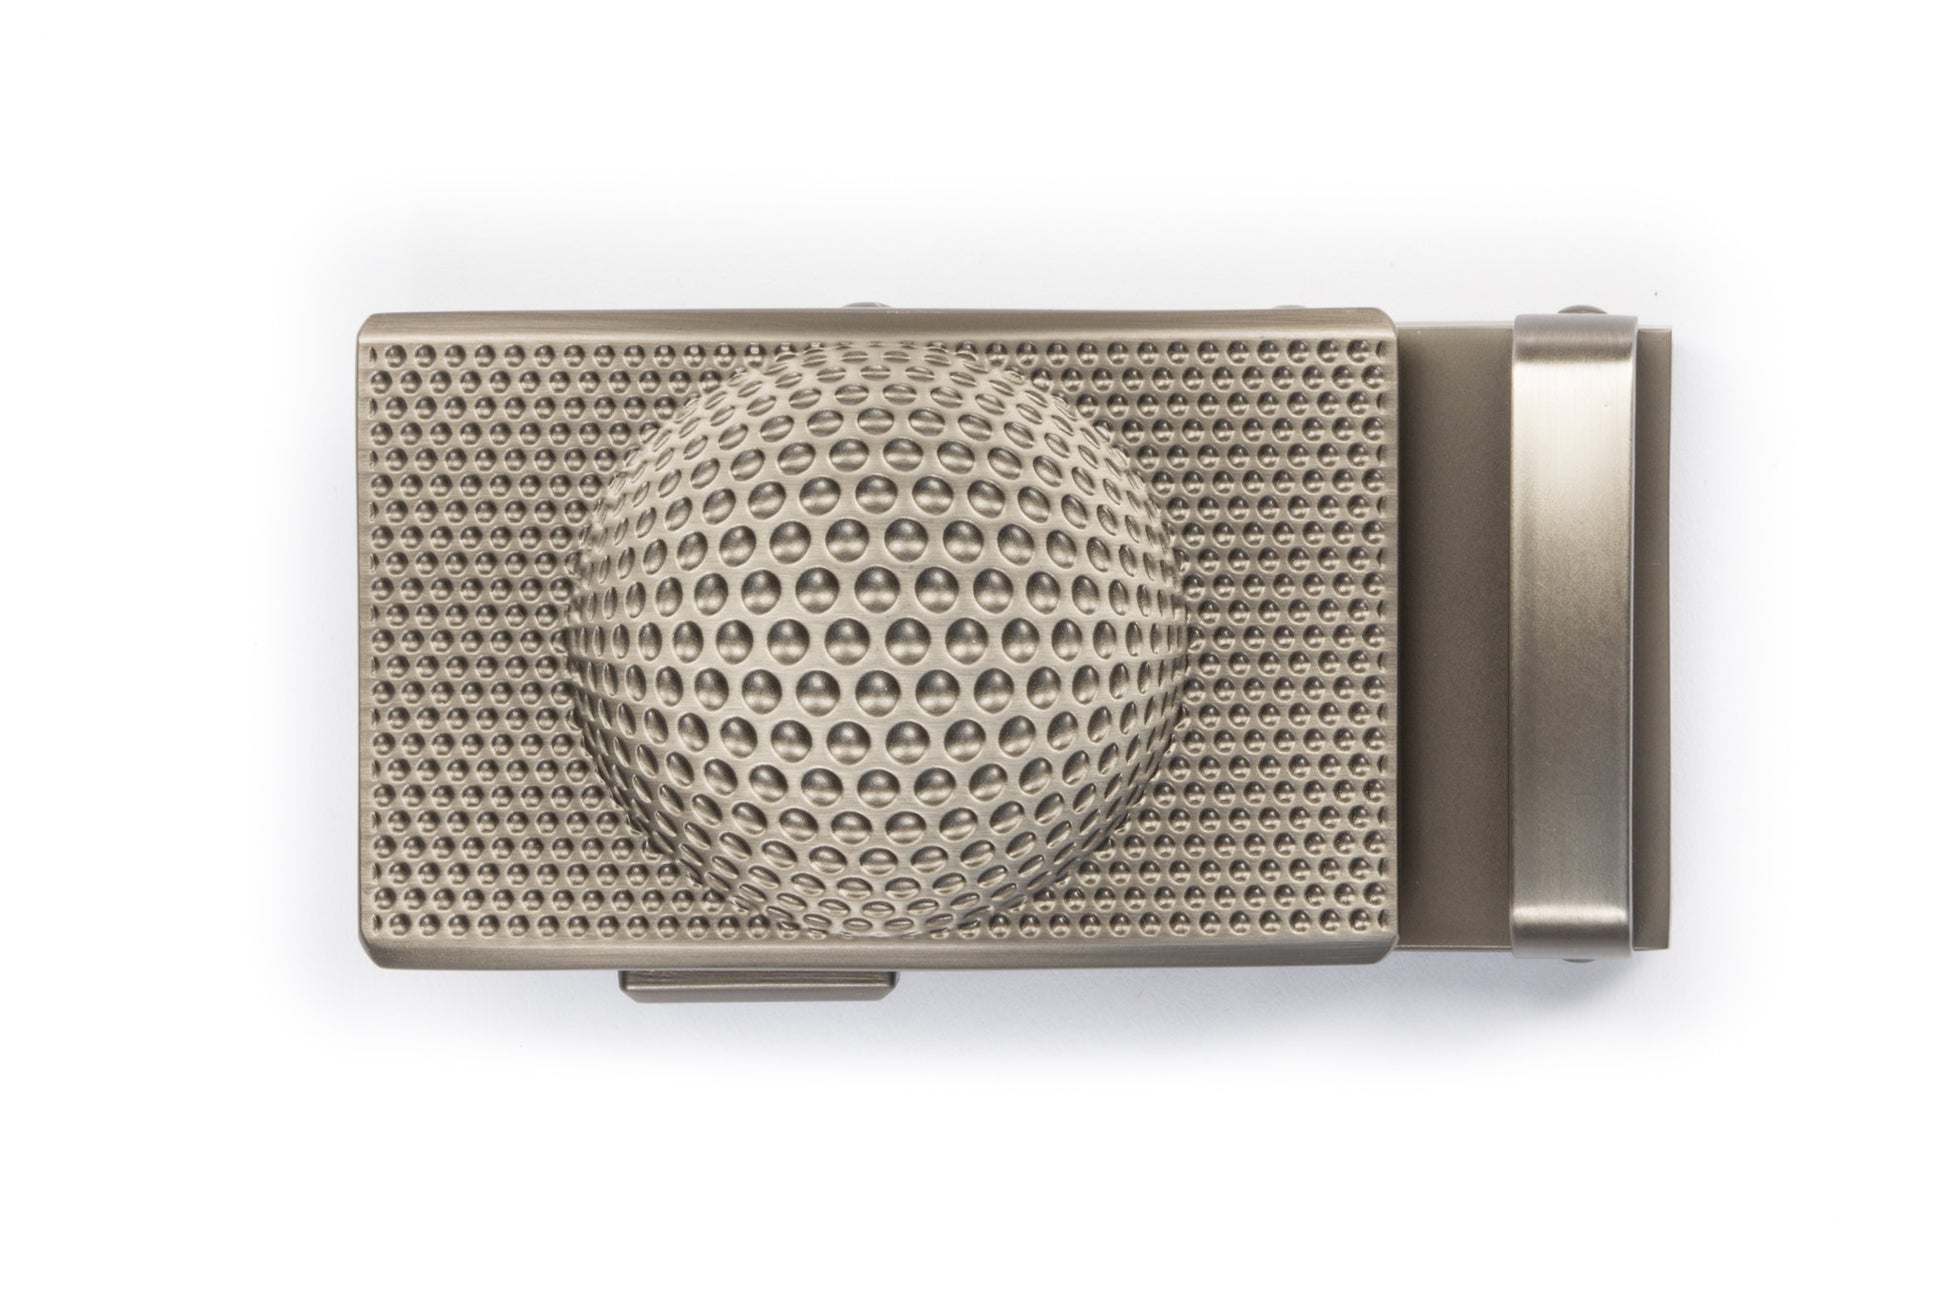 Men's golf ratchet belt buckle in gunmetal with a width of 1.5 inches, top view.